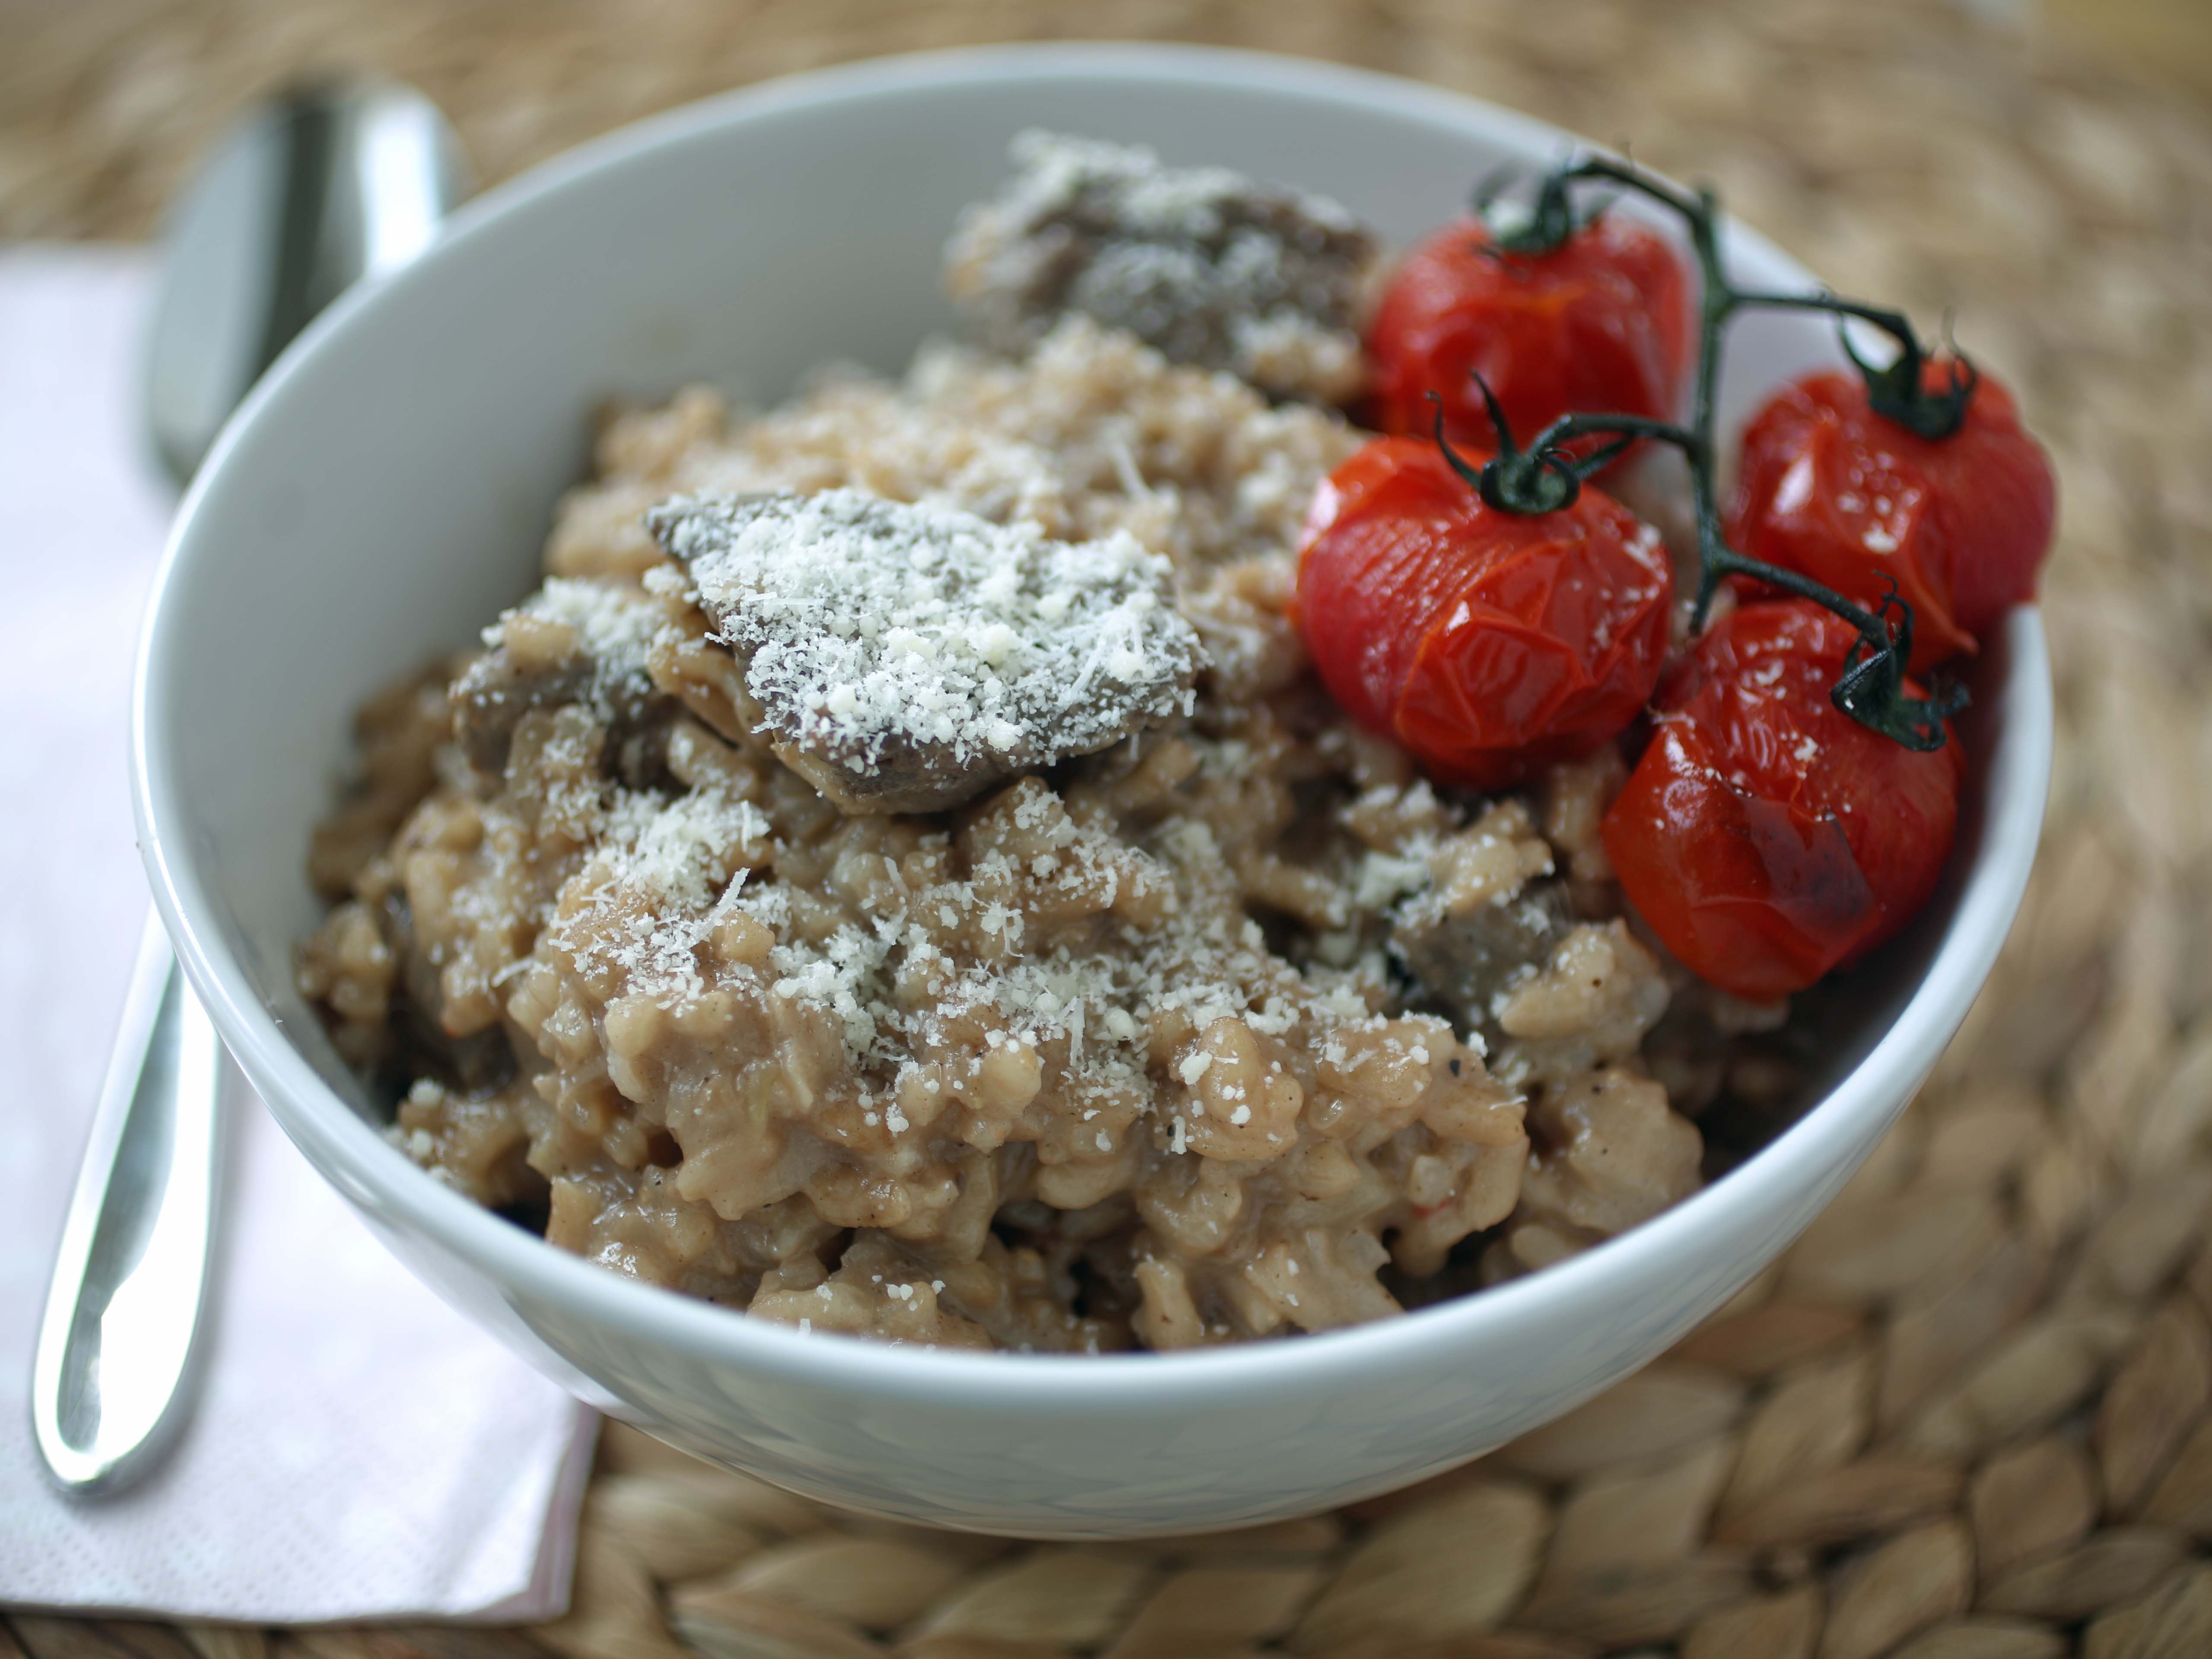 How to make Beef and Red Wine Risotto